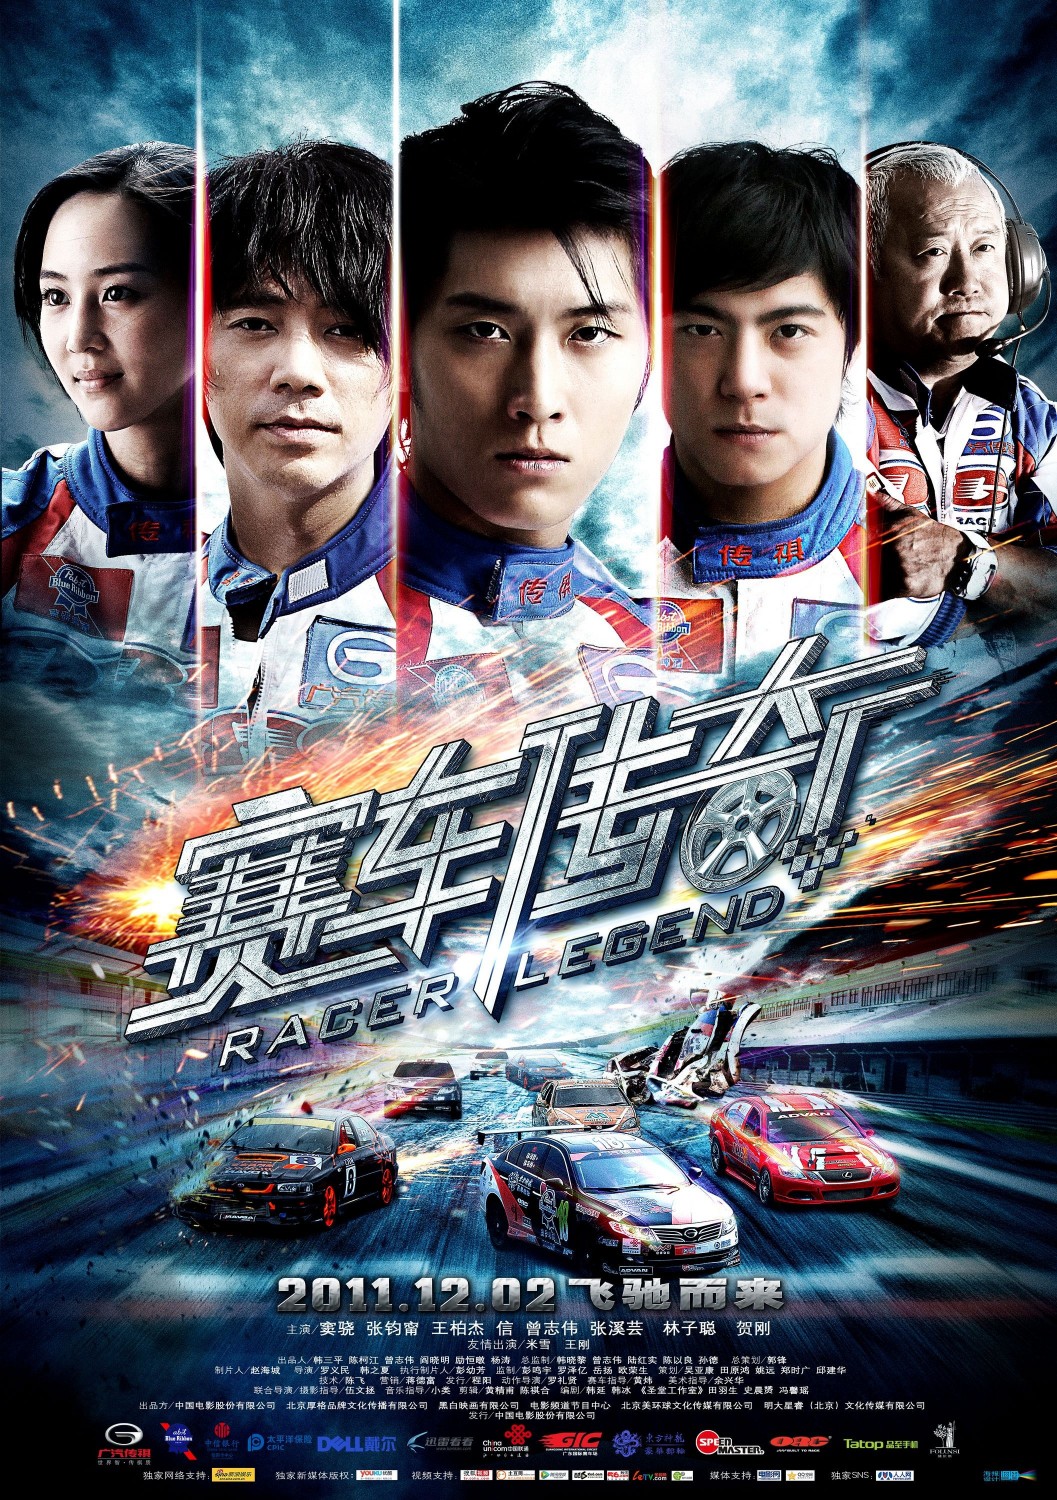 Extra Large Movie Poster Image for Racer Legend (#2 of 3)